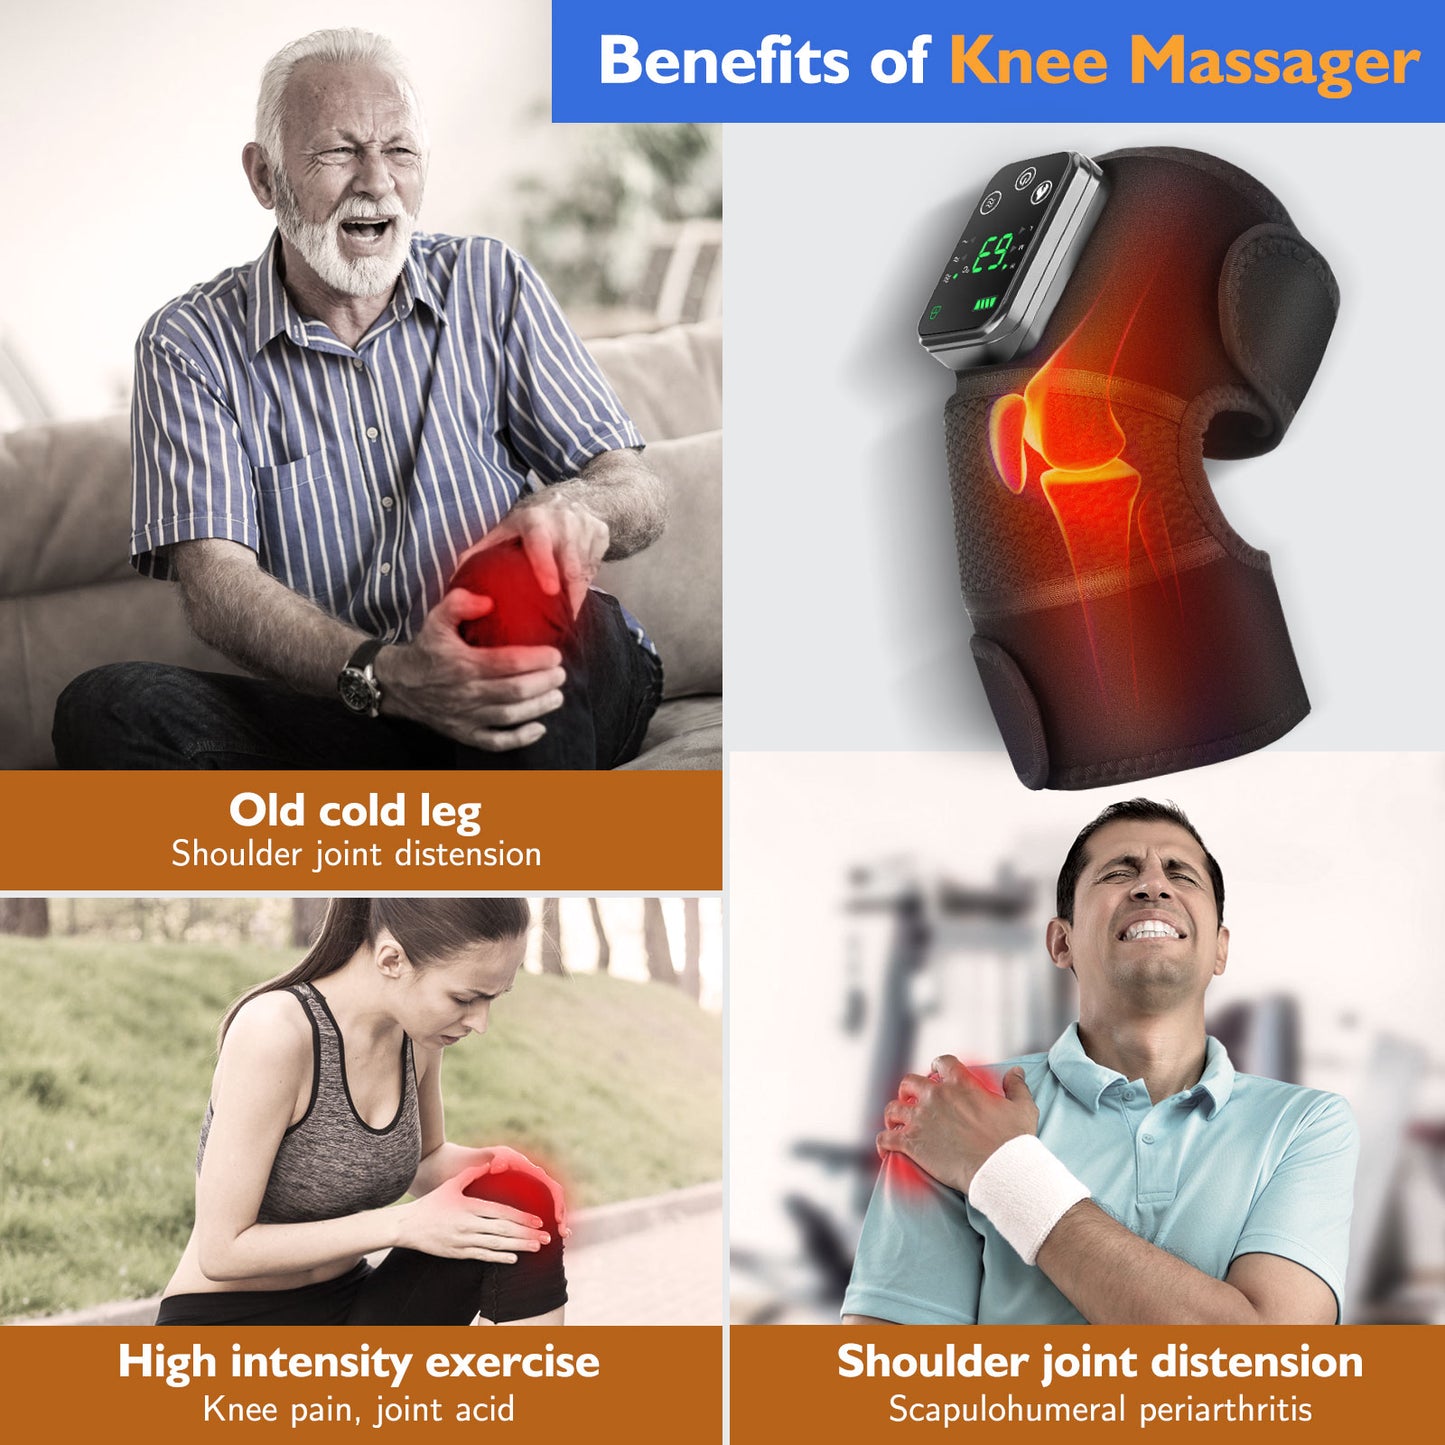 Heating Knee Massager for Pain Relief